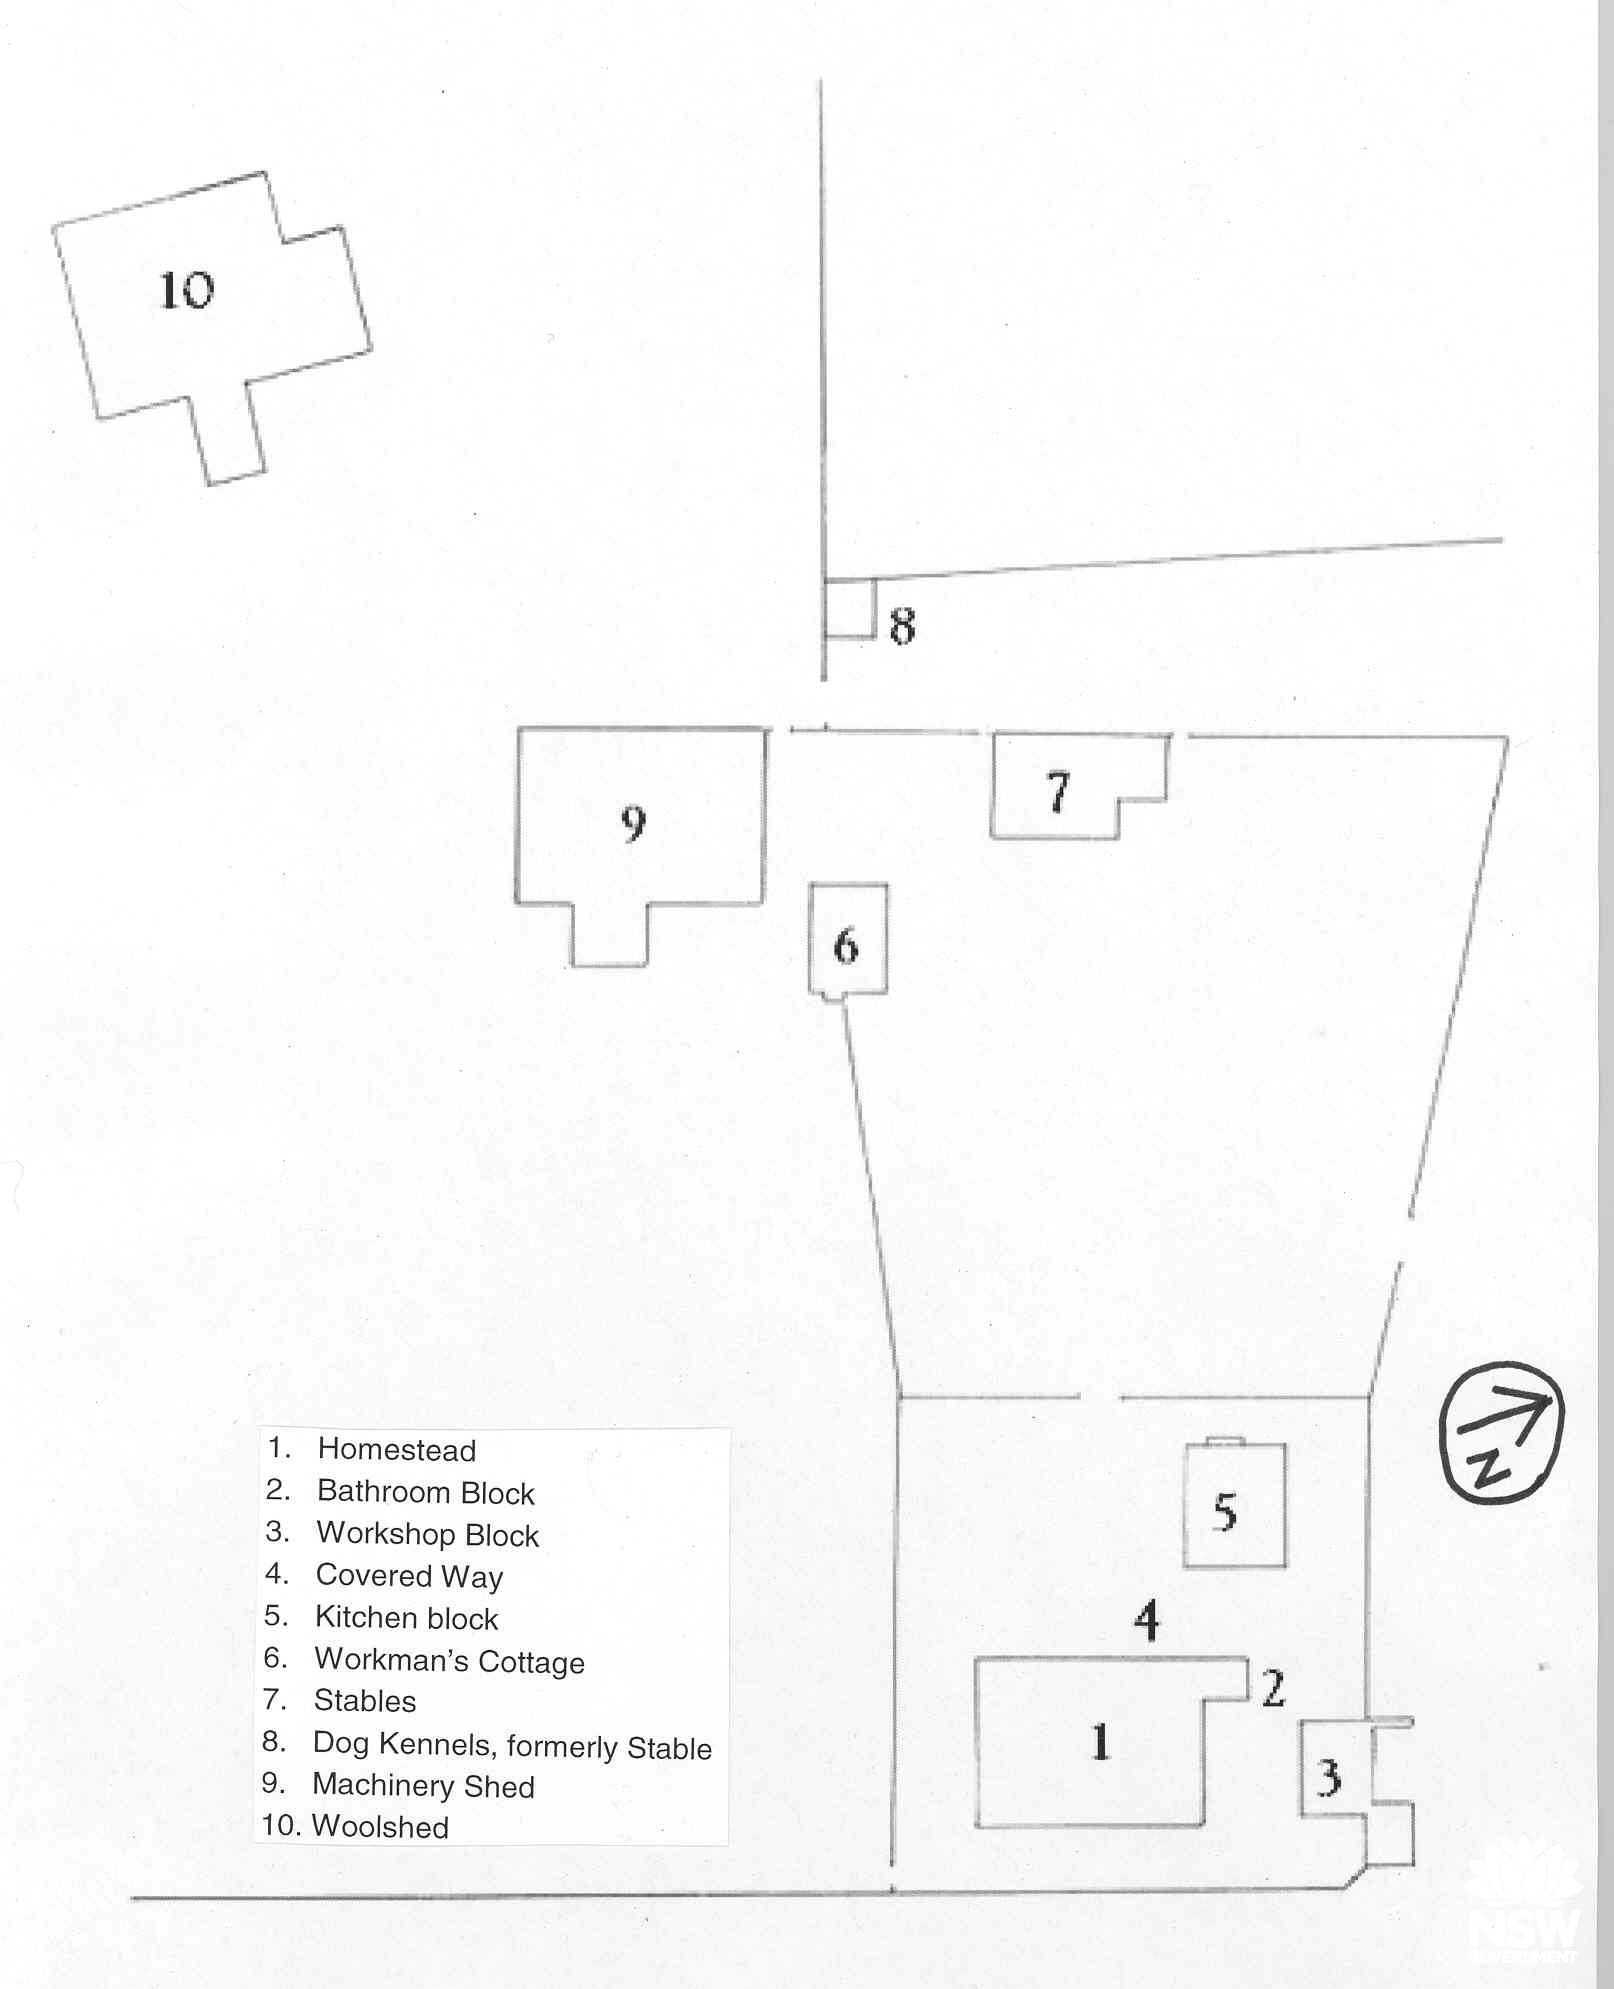 Site plan of Binnawee and outbuildings from John Broadley's Cconservation Management Plan for the site.